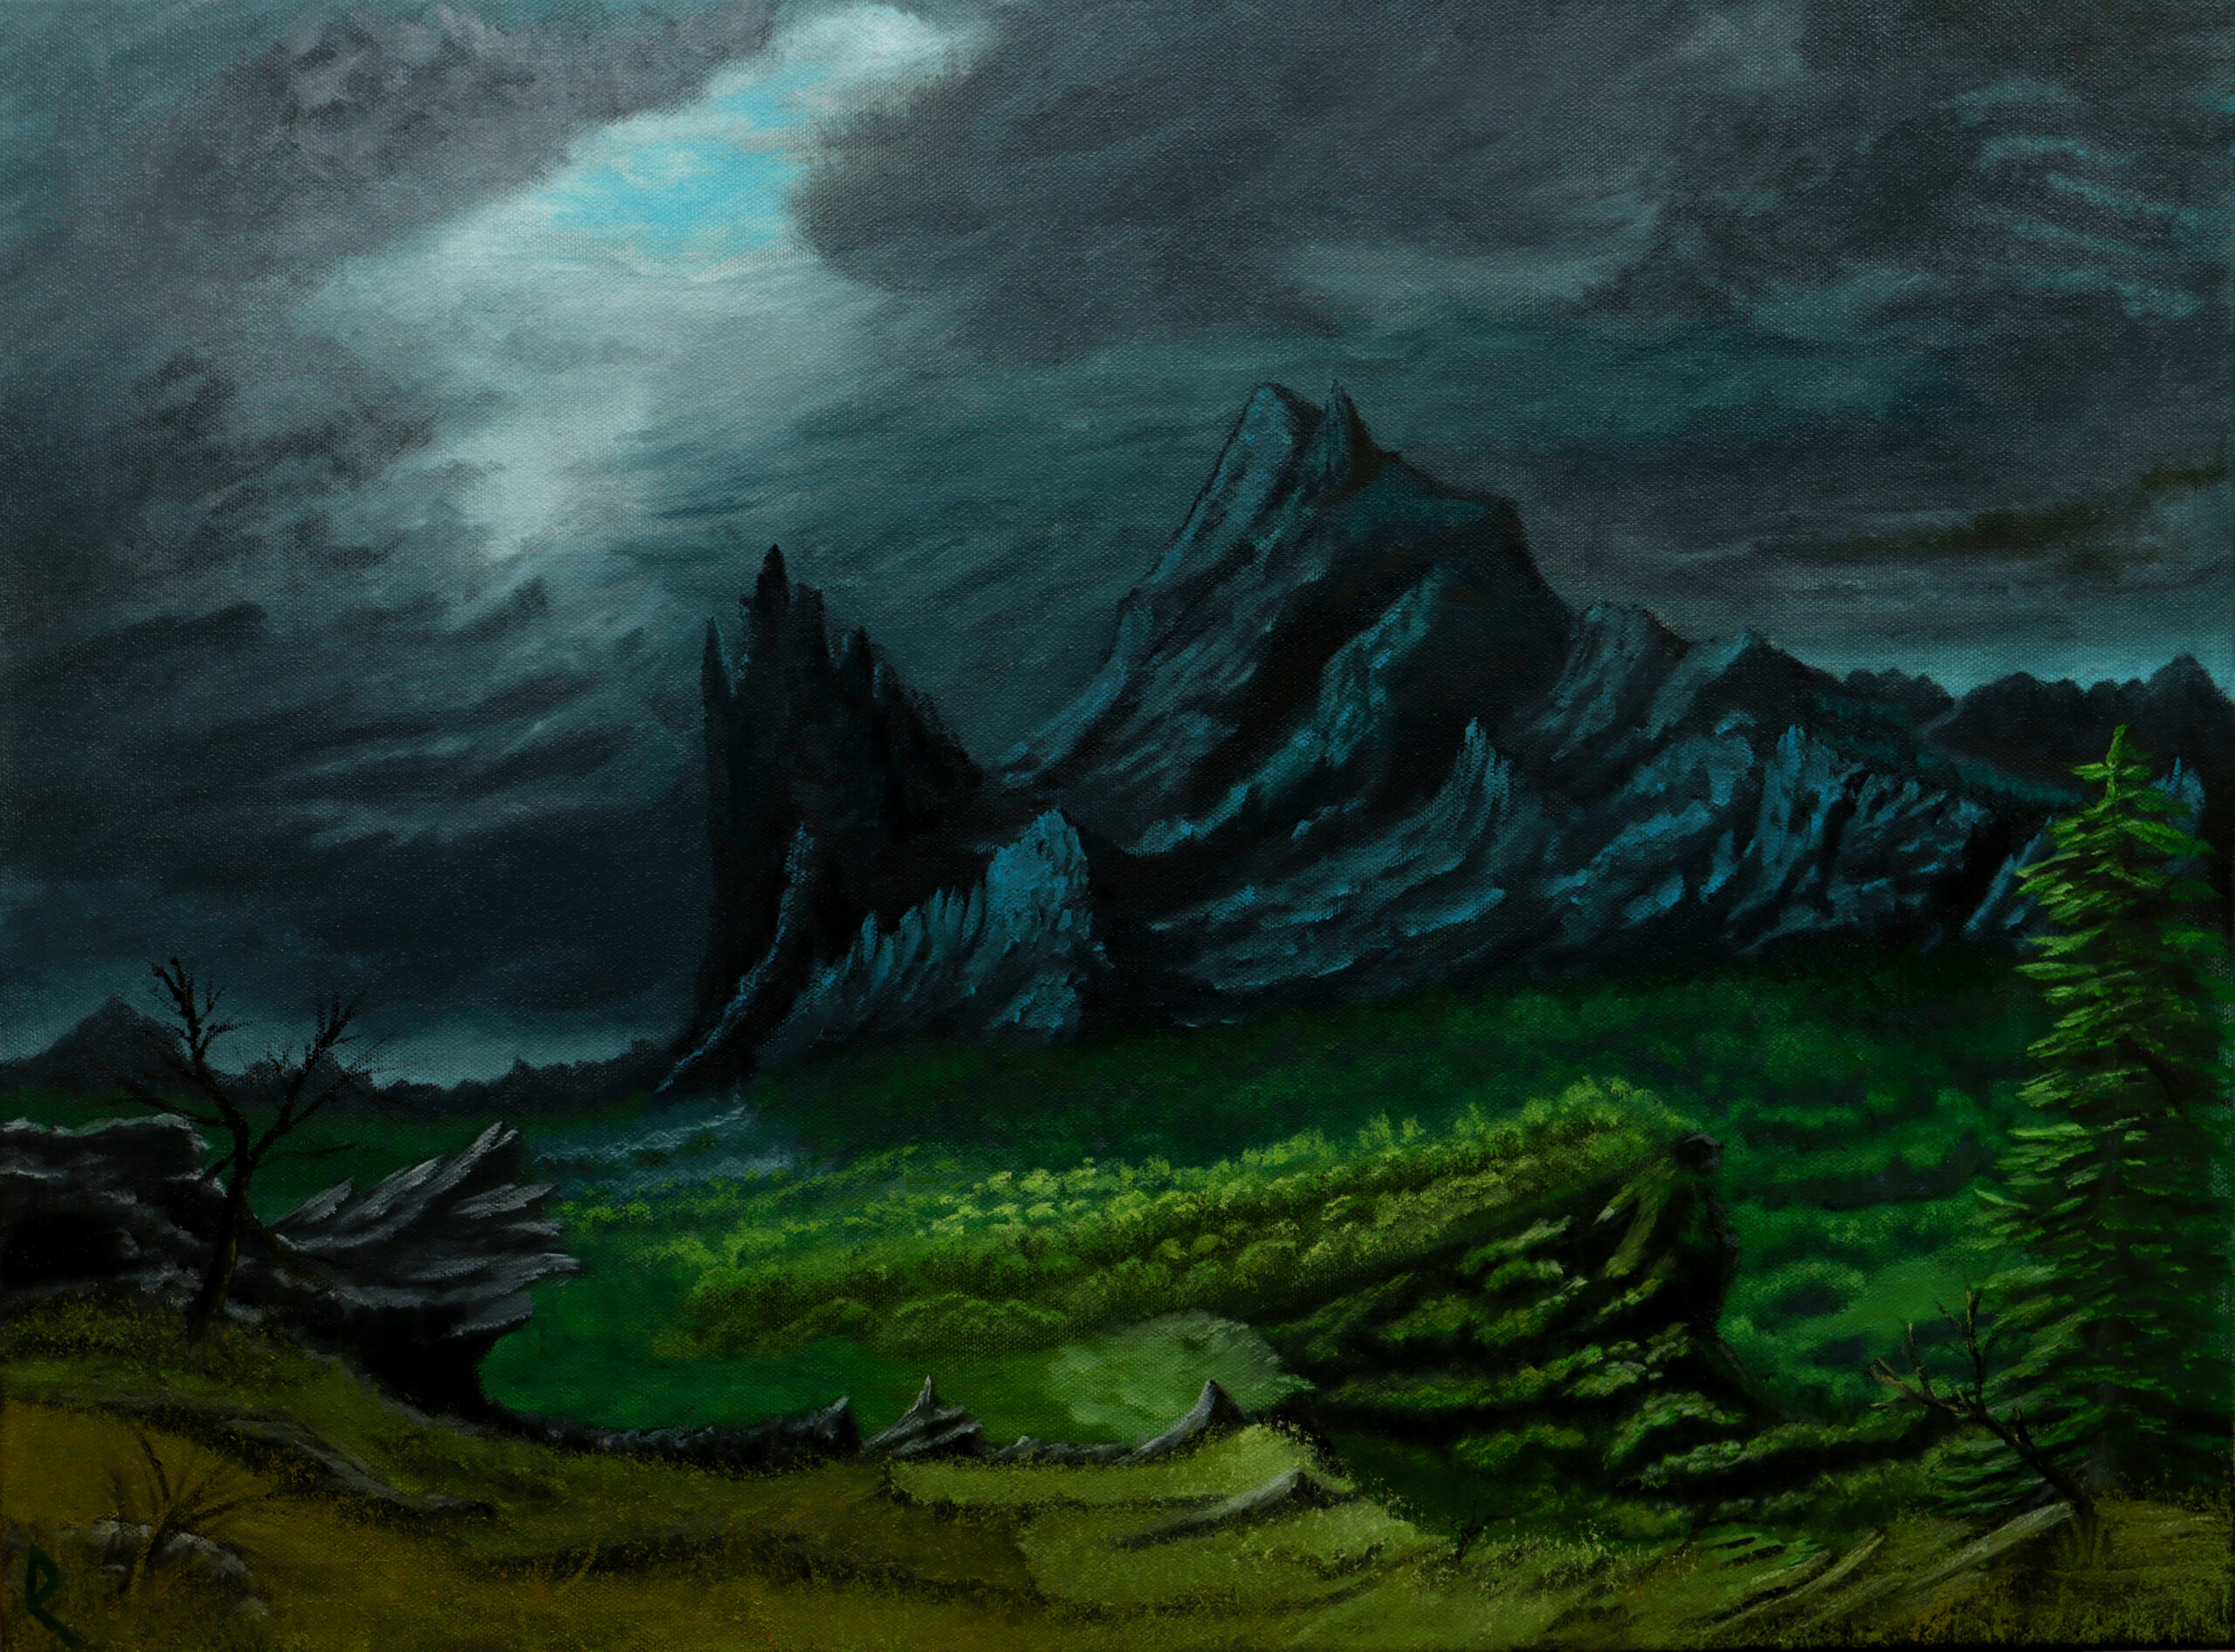 “Obsidian Peaks”, an 18”x24” oil painting showing a dark foreboding sky and black-blue mountains. A brief opening in the clouds shows the blue sky above, shining down on a valley teeming with forests. Inspired by an illustration from @tobyfoxart.bsky.social